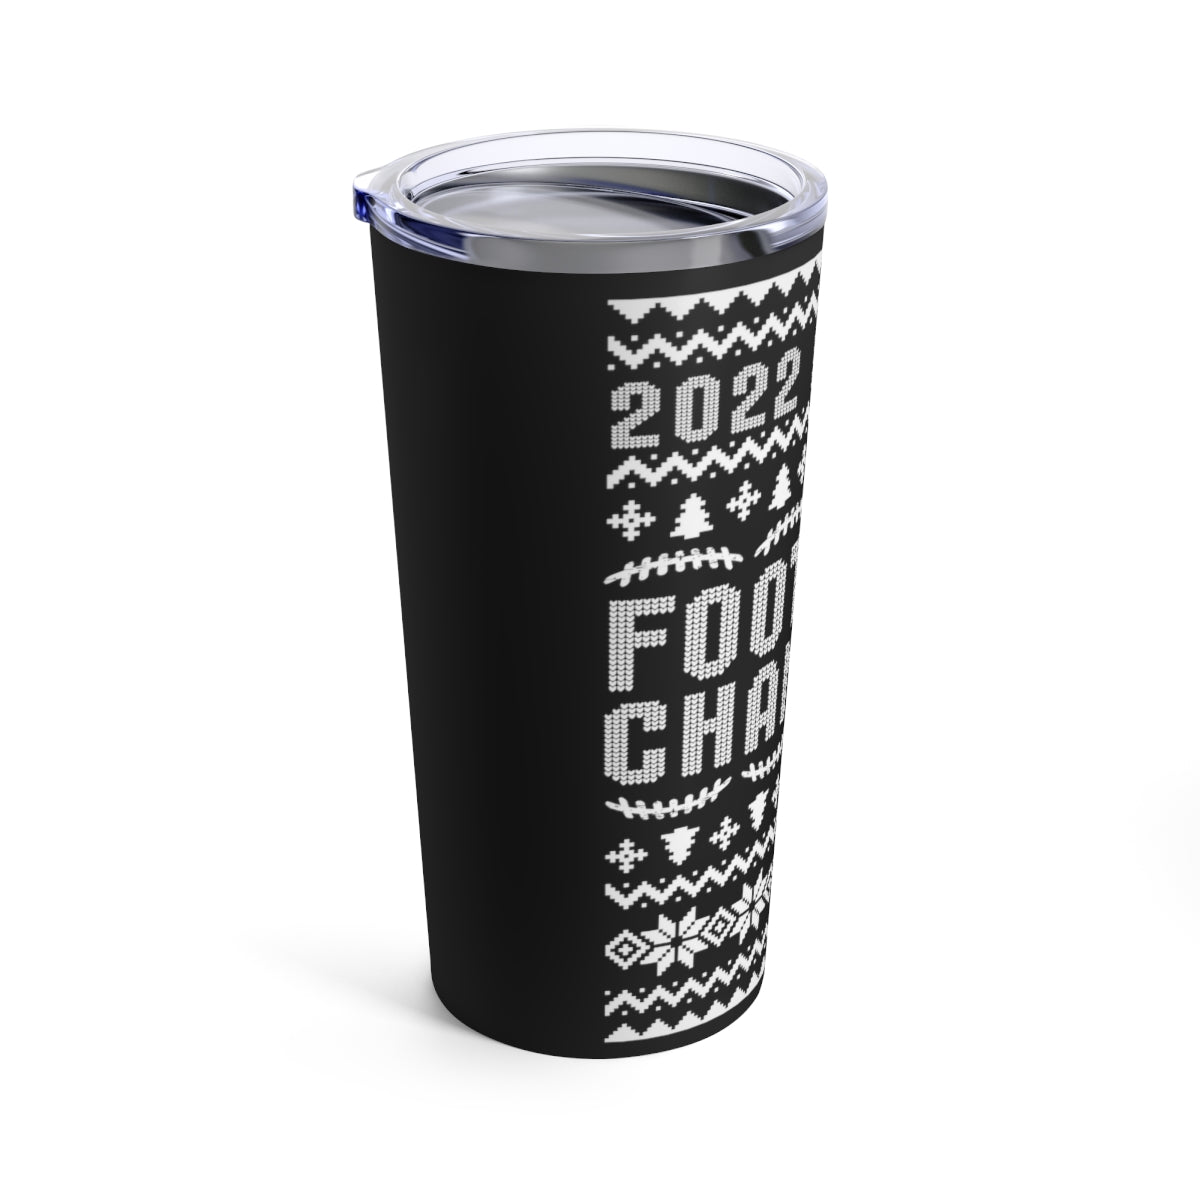 2022 Fantasy Football Champion Ugly Holiday Christmas Champ Tumbler 20oz Beverage Container